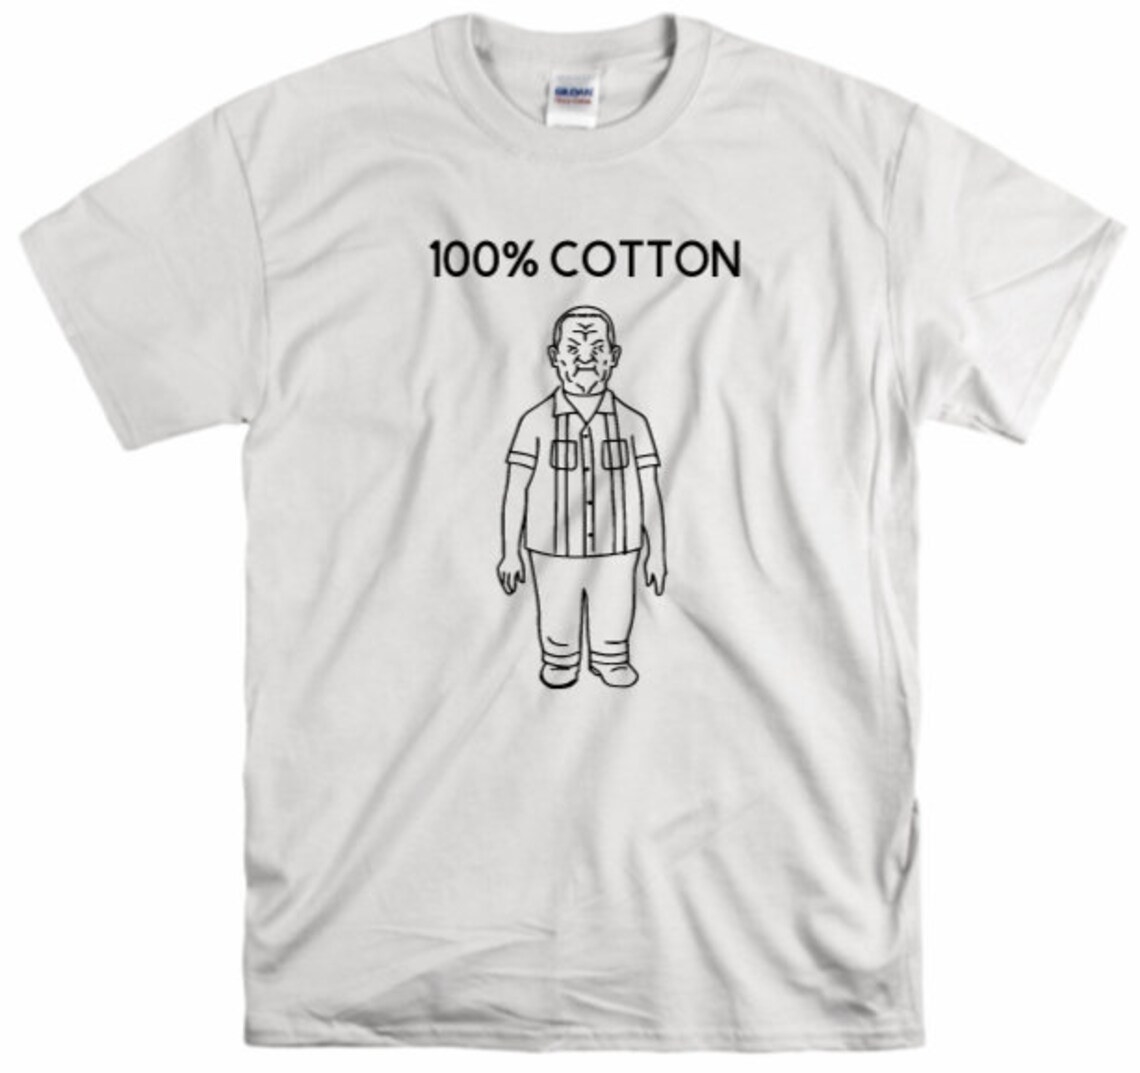 white tee with cotton hill from king of the hill that says 100% cotton